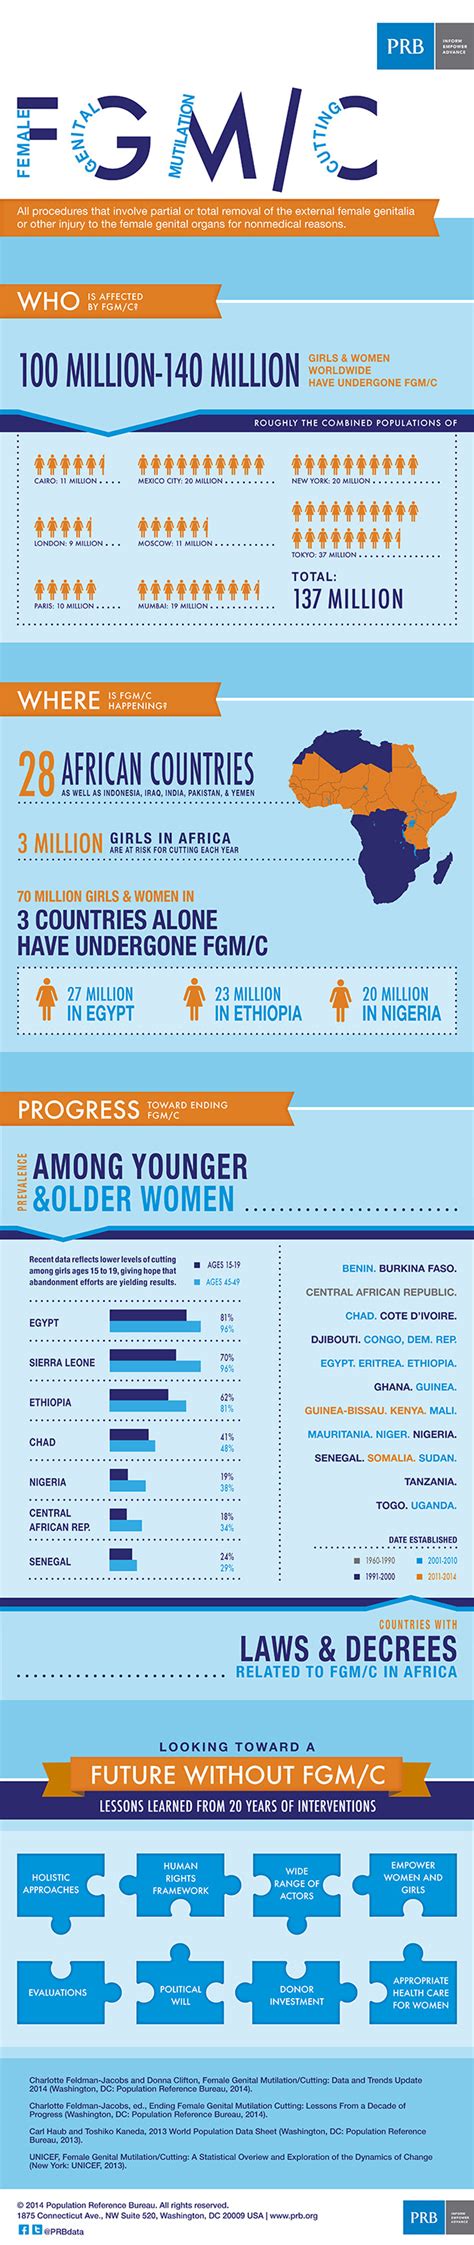 female genital mutilation cutting data and trends update 2014 infographic prb